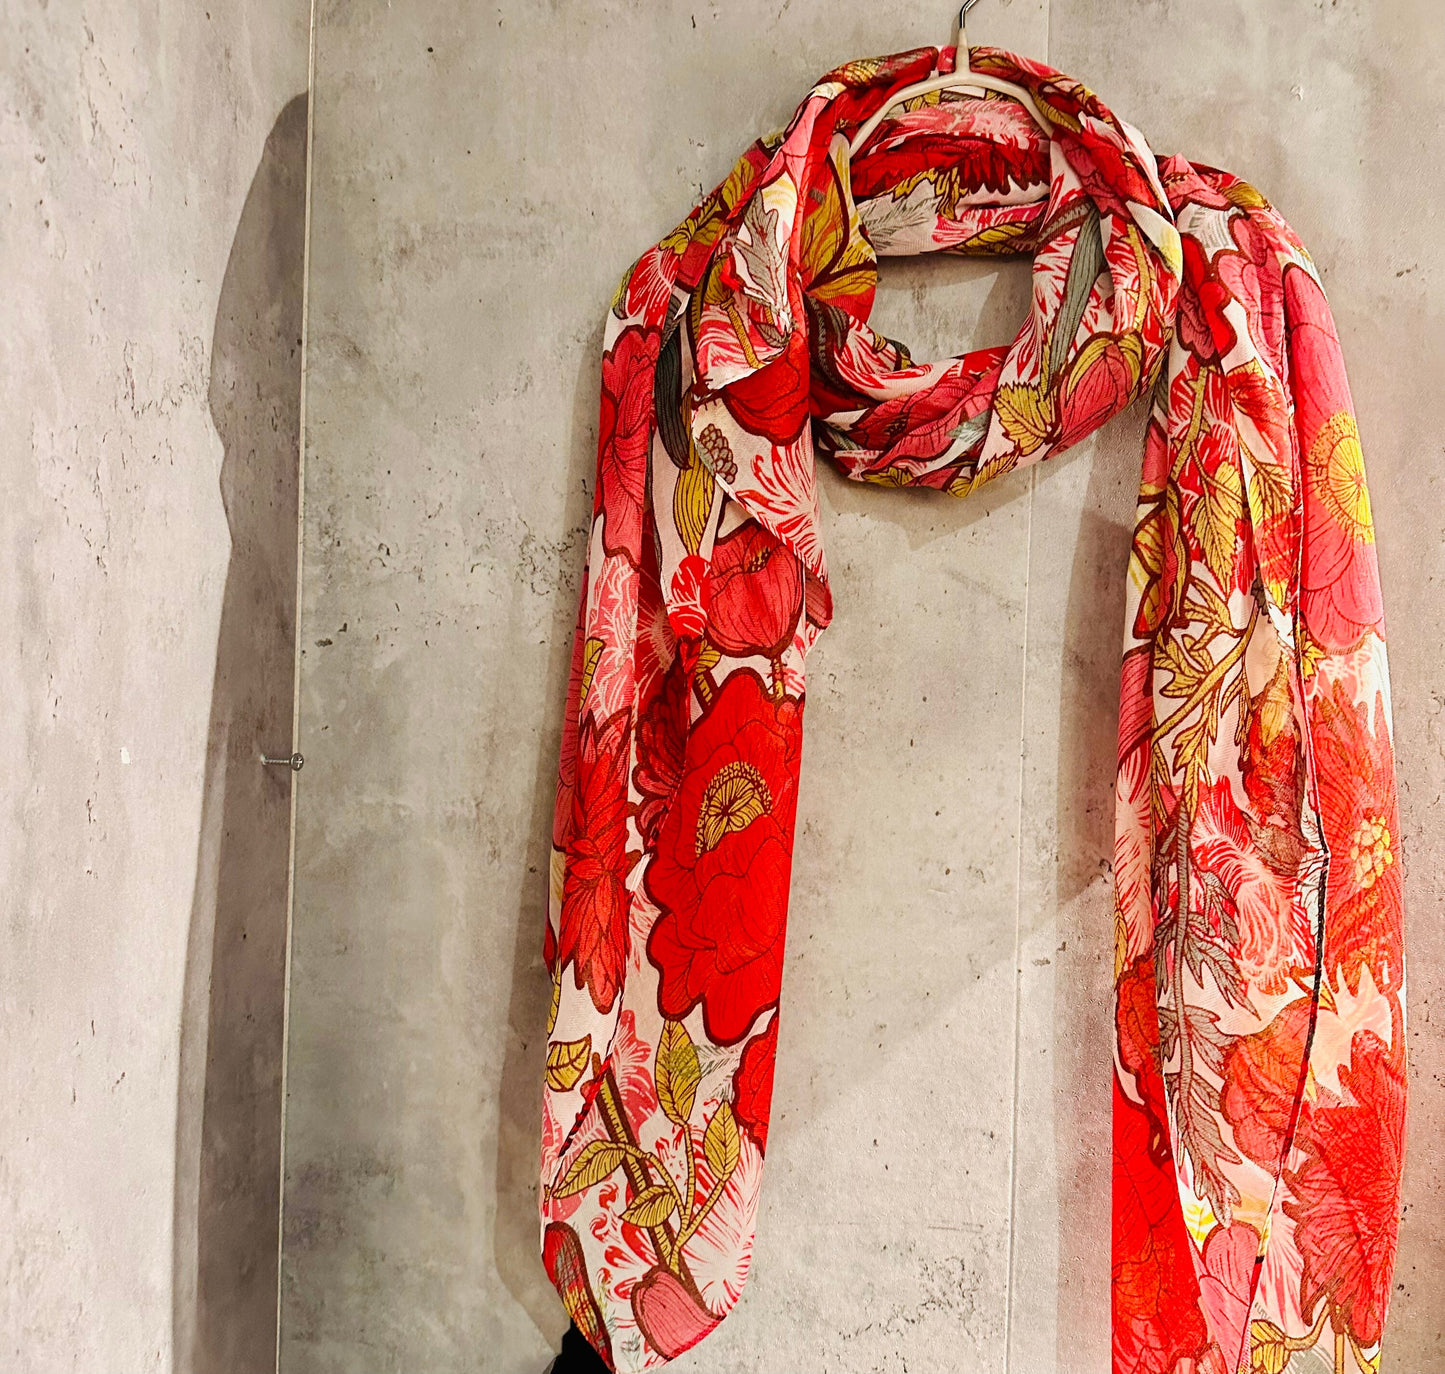 Red Organic Cotton Scarf with Sketched Flowers and Leaves – An Eco-Friendly Gift for Mom, Perfect for Birthday and Christmas Celebrations